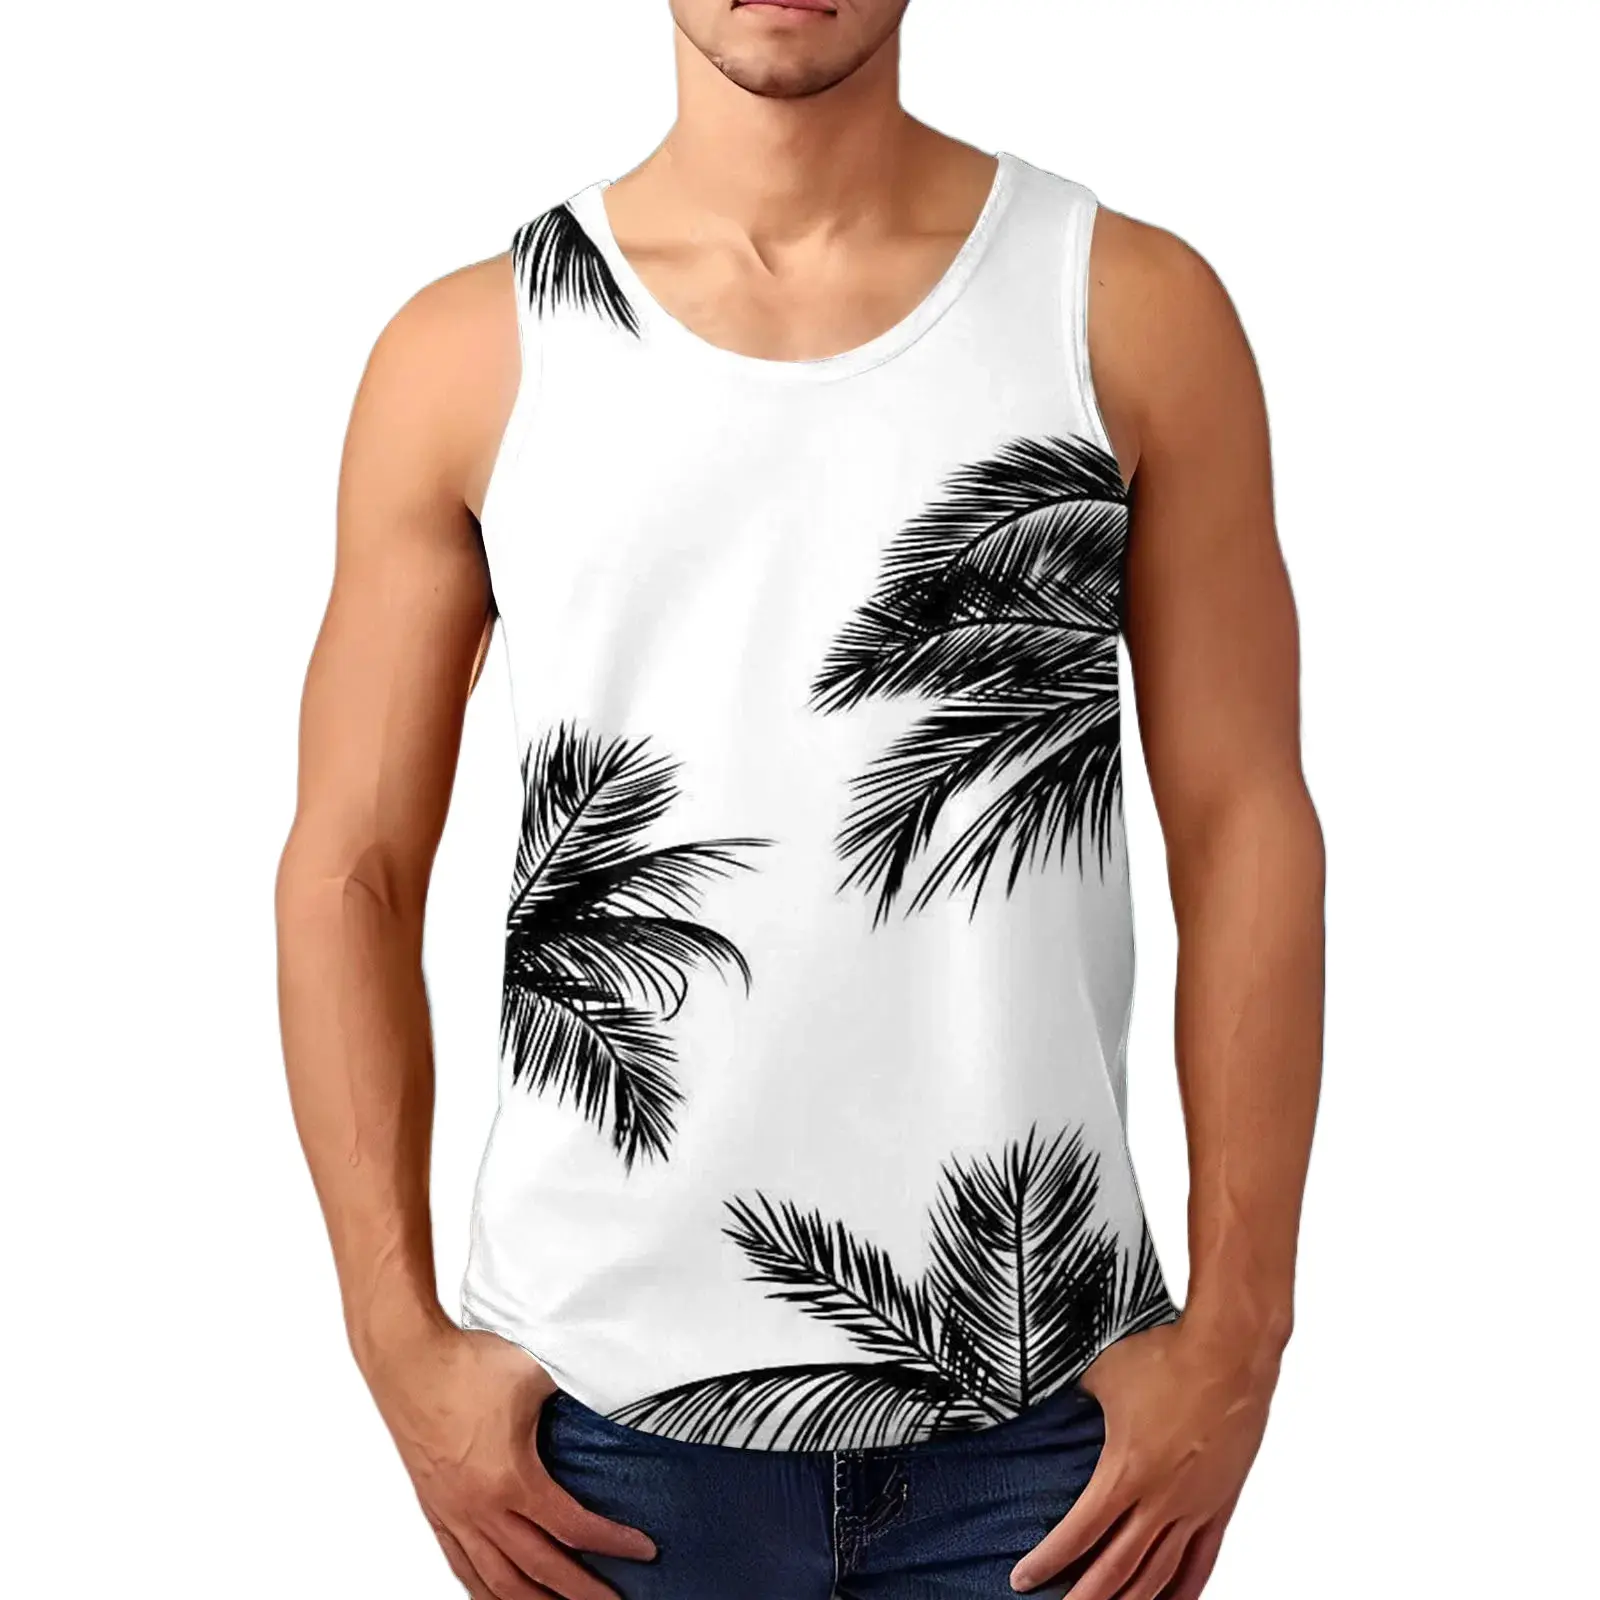 Fitspi Mens Hawaiian Top Male Casual 3d Coconut Tree Leaf Printed Summer Sleeveless Shirt Clothing Bodybuilding Casual Vest